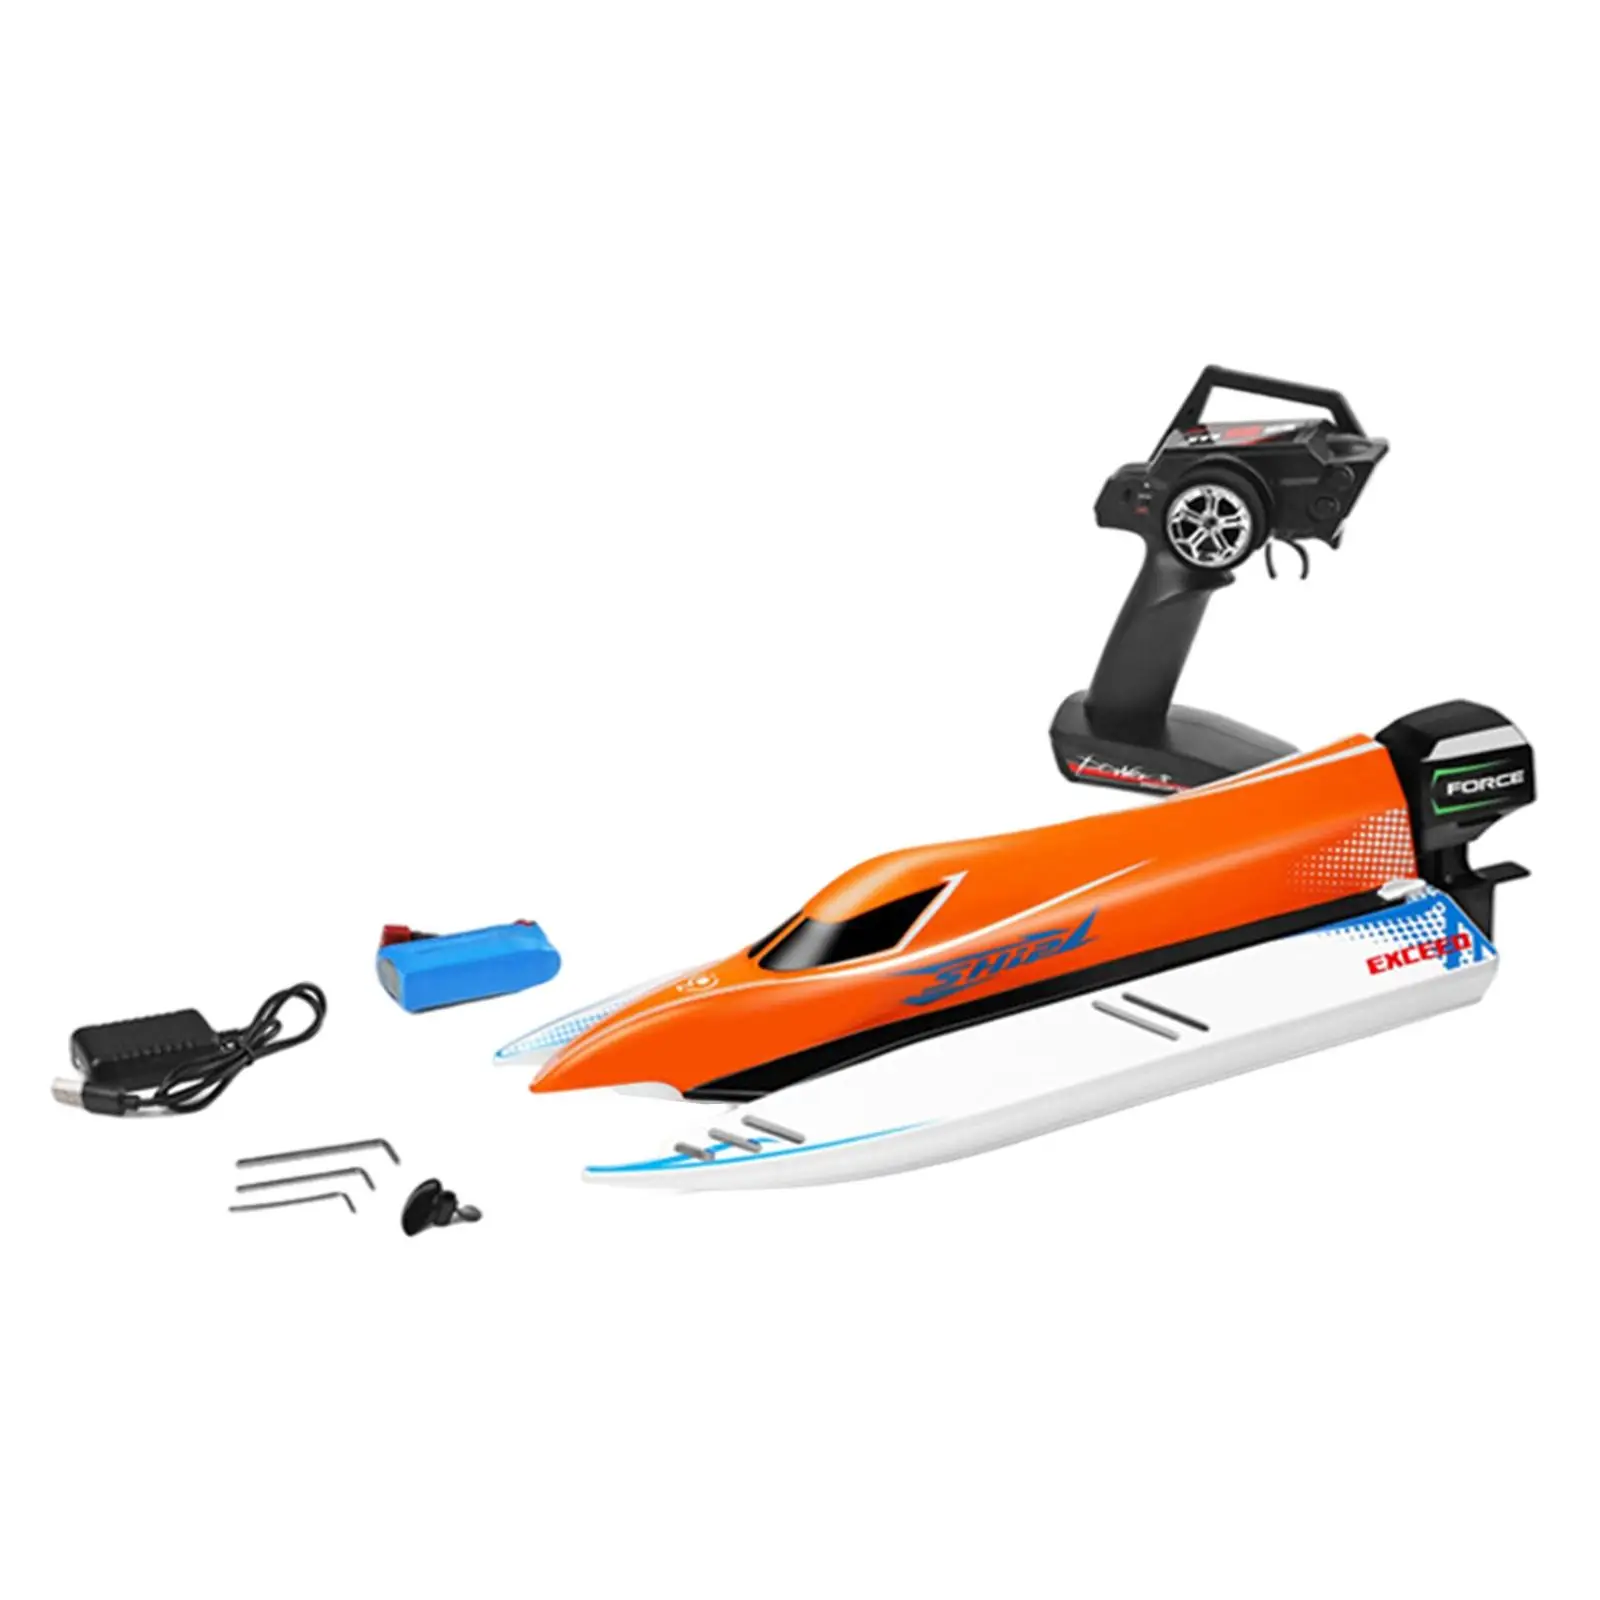 2.4G RC Ship Speedboat Remote Control Self-Righting Racing Boat 45km/h